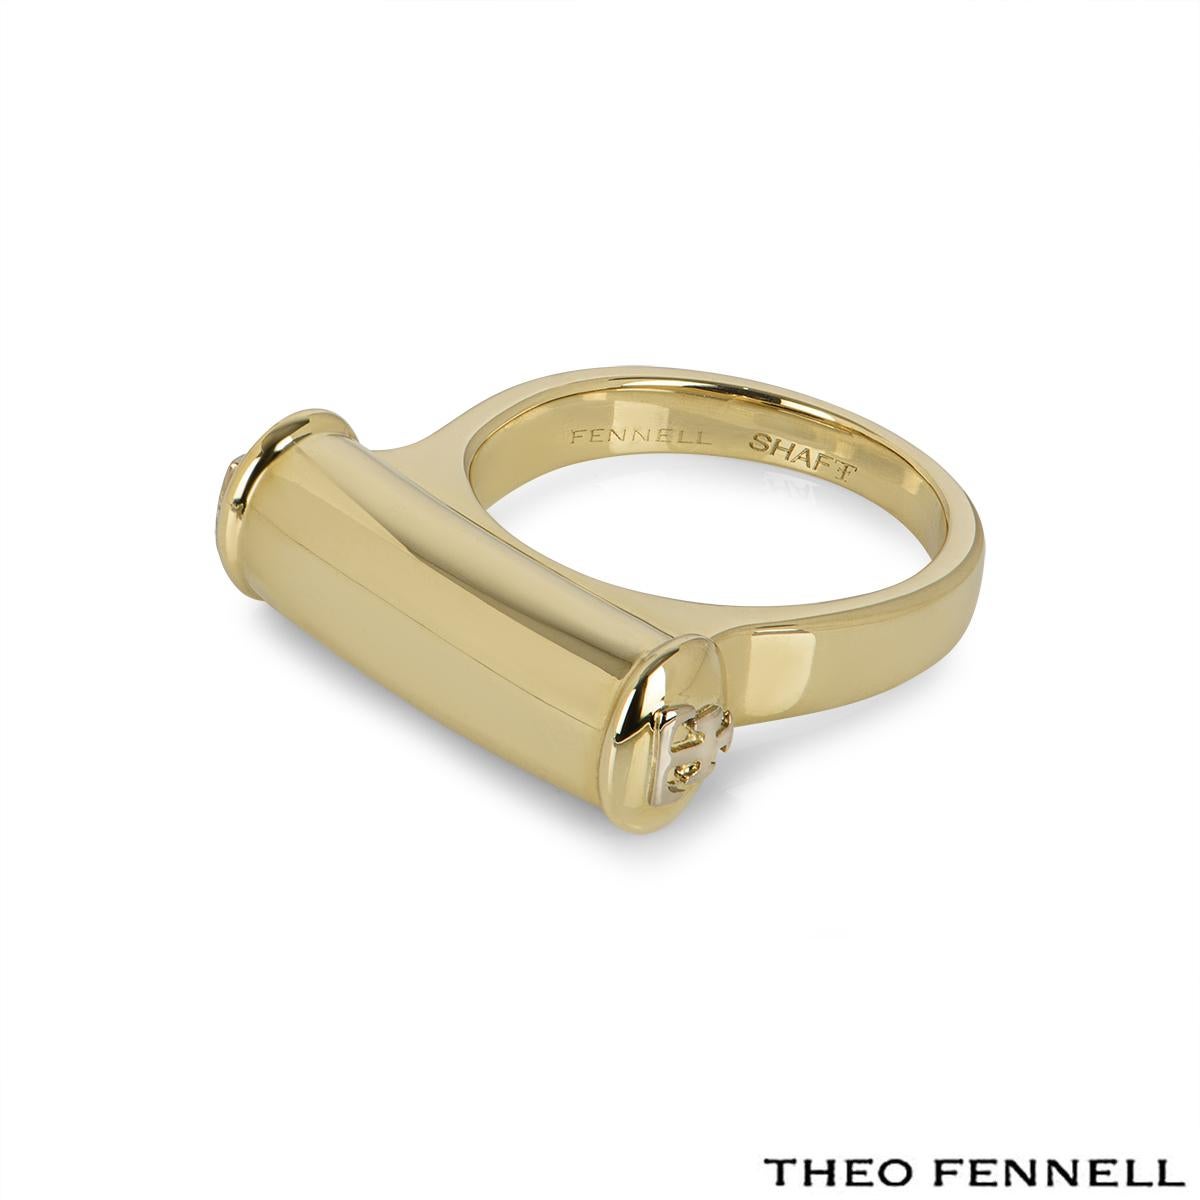 theo fennell silver rings